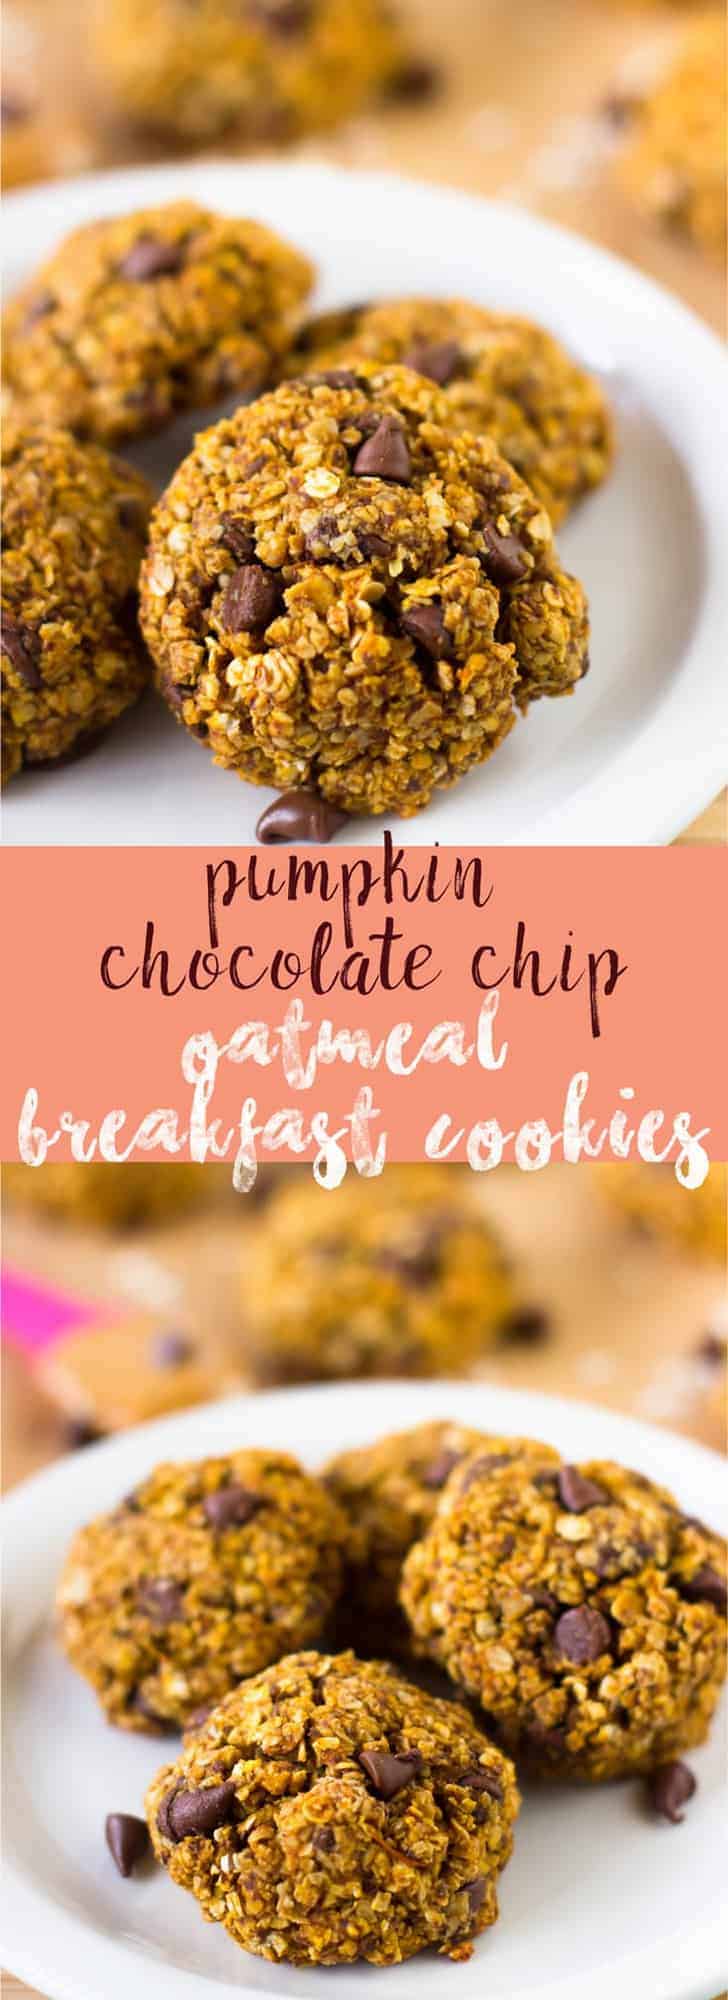 These Pumpkin Chocolate Chip Oatmeal Breakfast Cookies are cookies so healthy they can be eaten as breakfast! They're super tasty, gluten free and vegan! via https://jessicainthekitchen.com